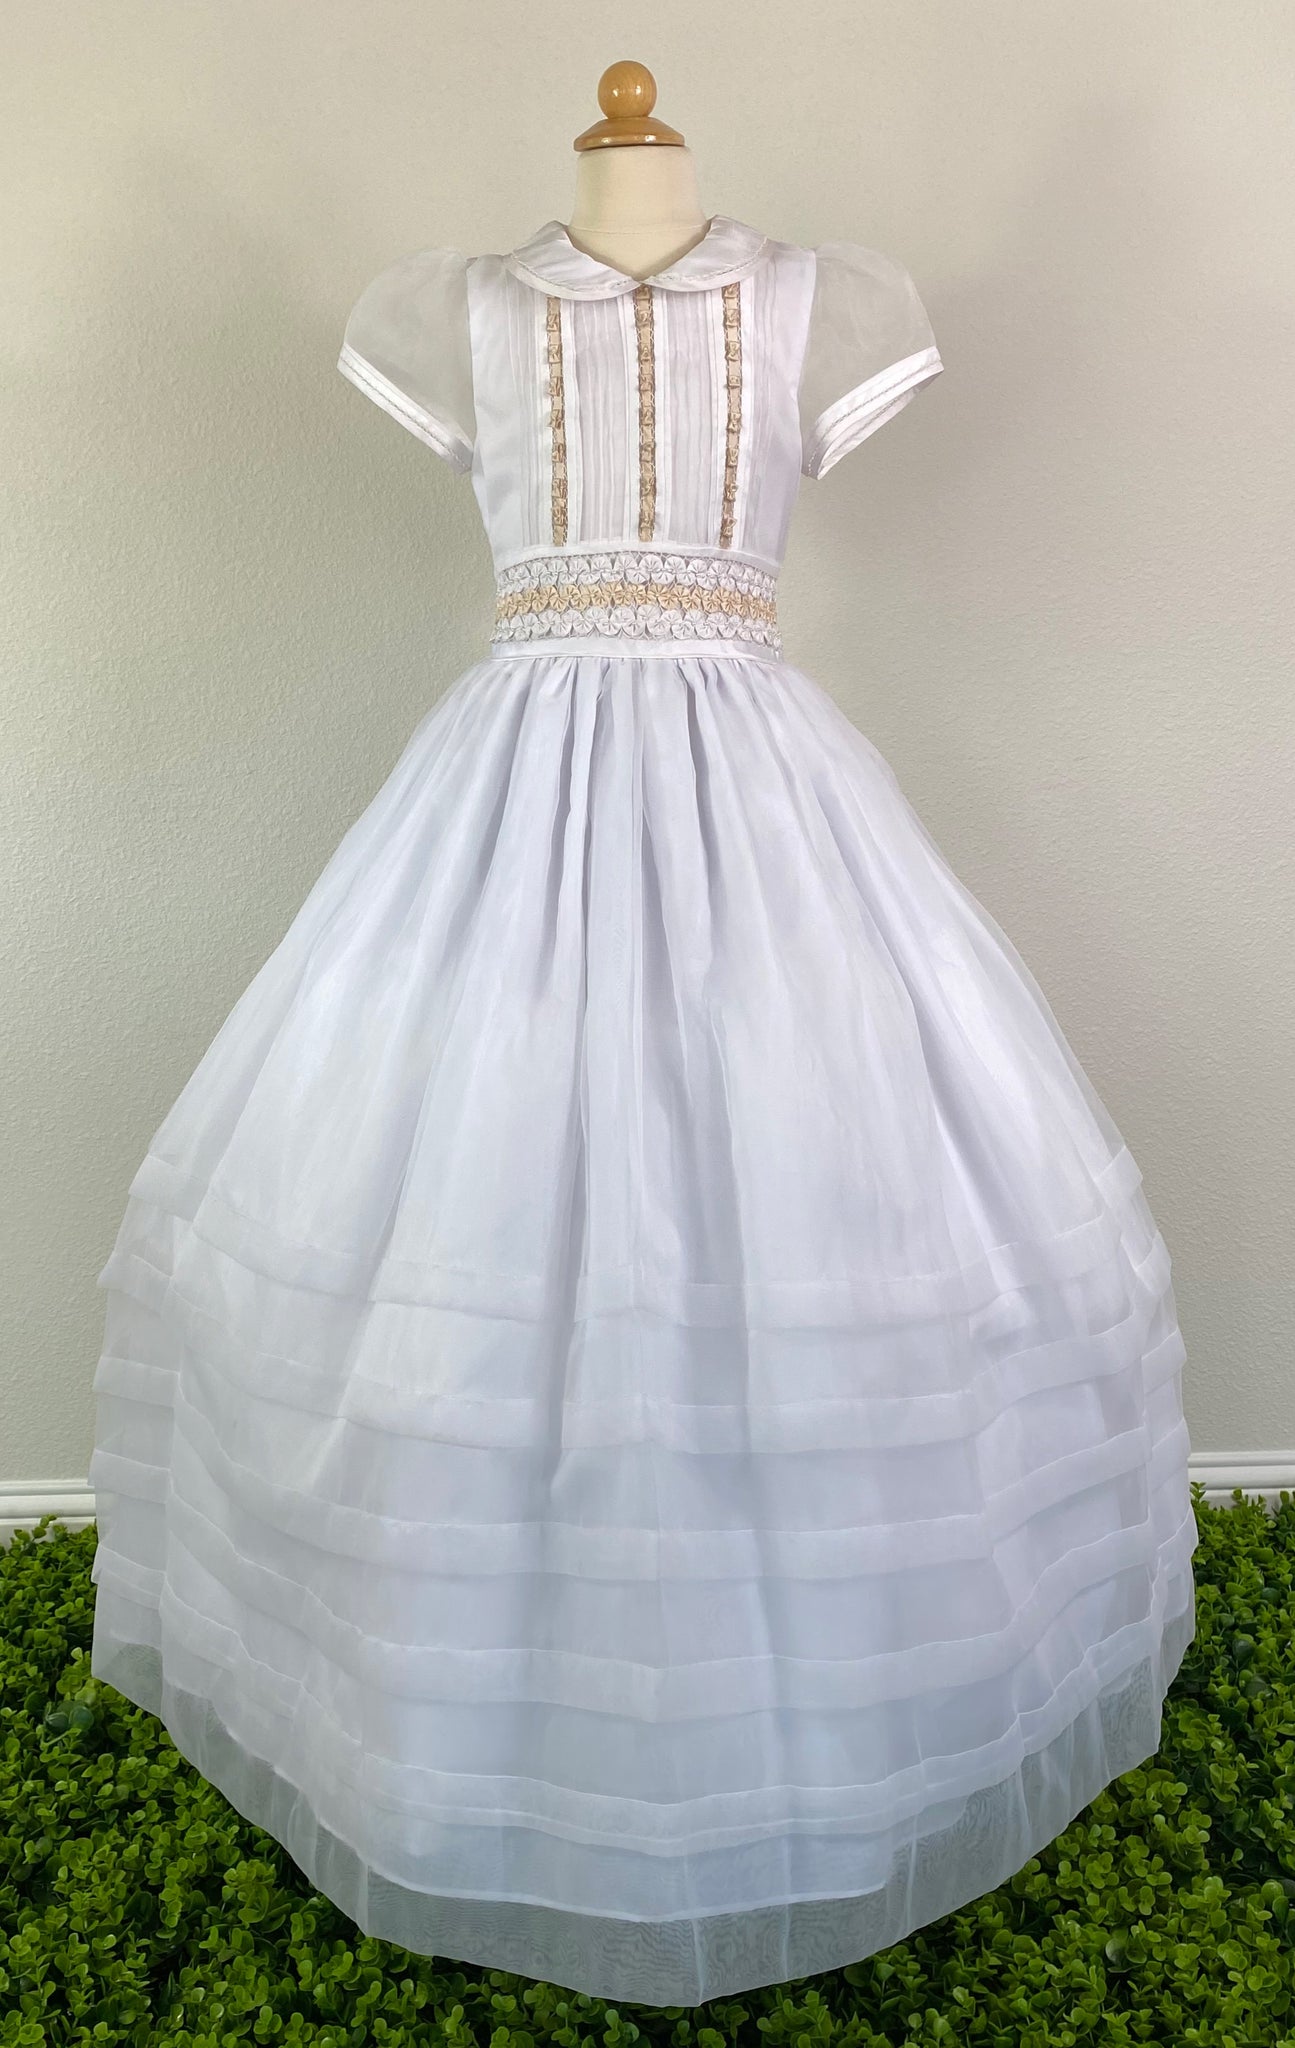 White, size 10 Contrast collar Satin trimmed short sleeve Vertical pleats with beige bows on front bodice with pearls Wide Band with three rows of pinwheel bows (white, beige, white) Stripe bands around bottom Pearl button closure Mesh ribbon for bow